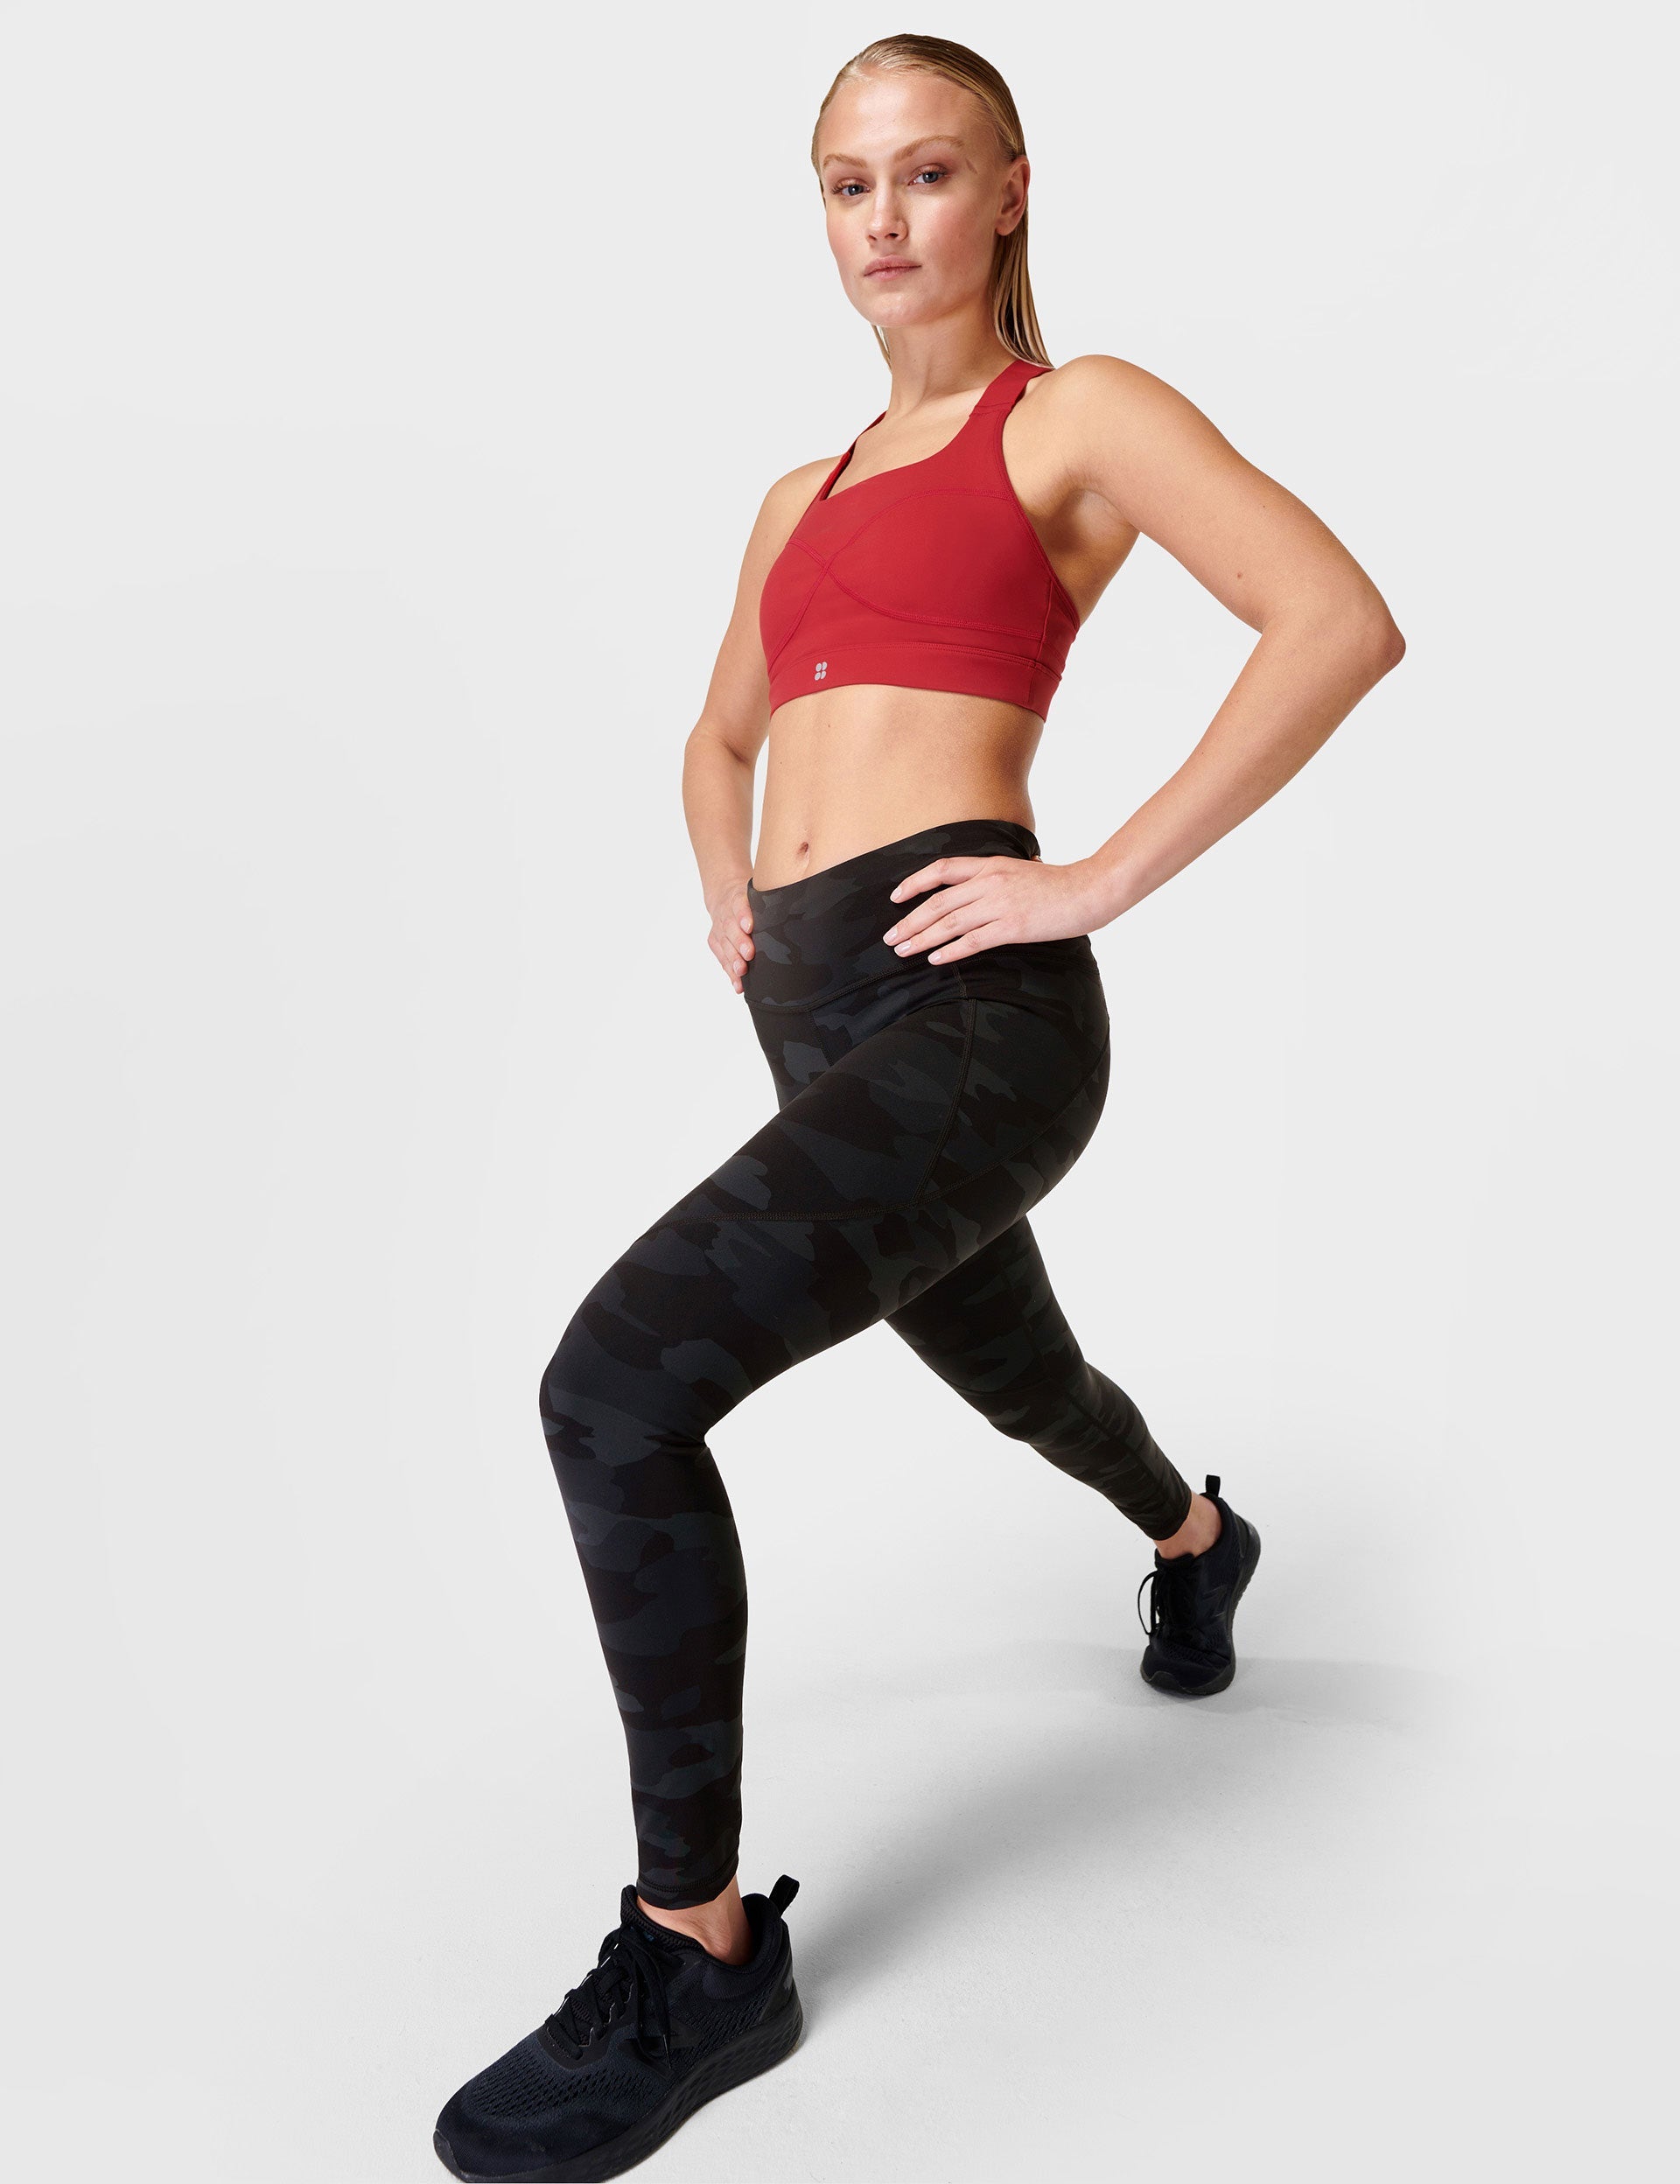 Sweaty Betty Power Gym Leggings  These Workout Leggings With